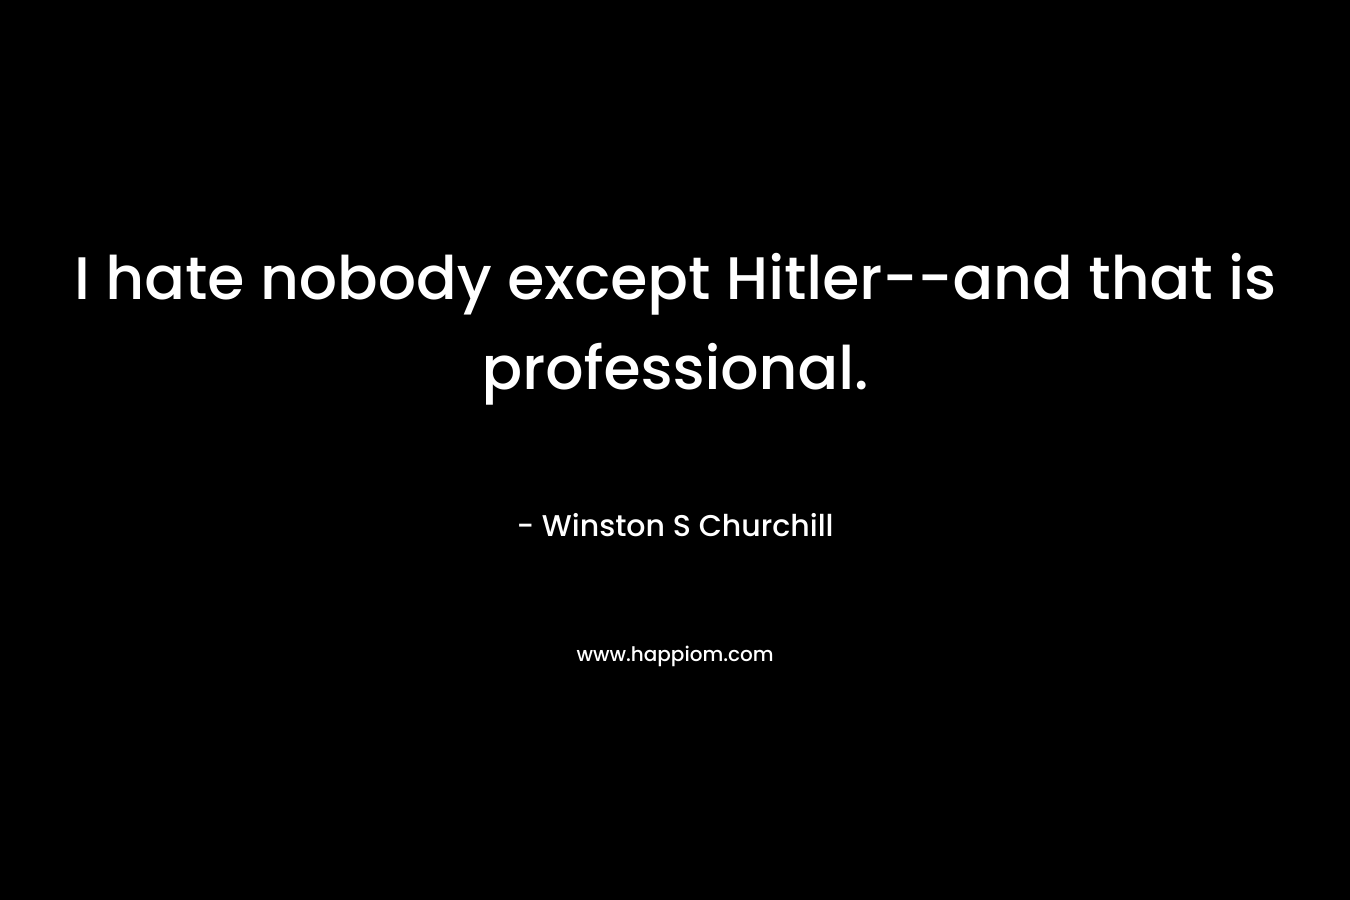 I hate nobody except Hitler--and that is professional.